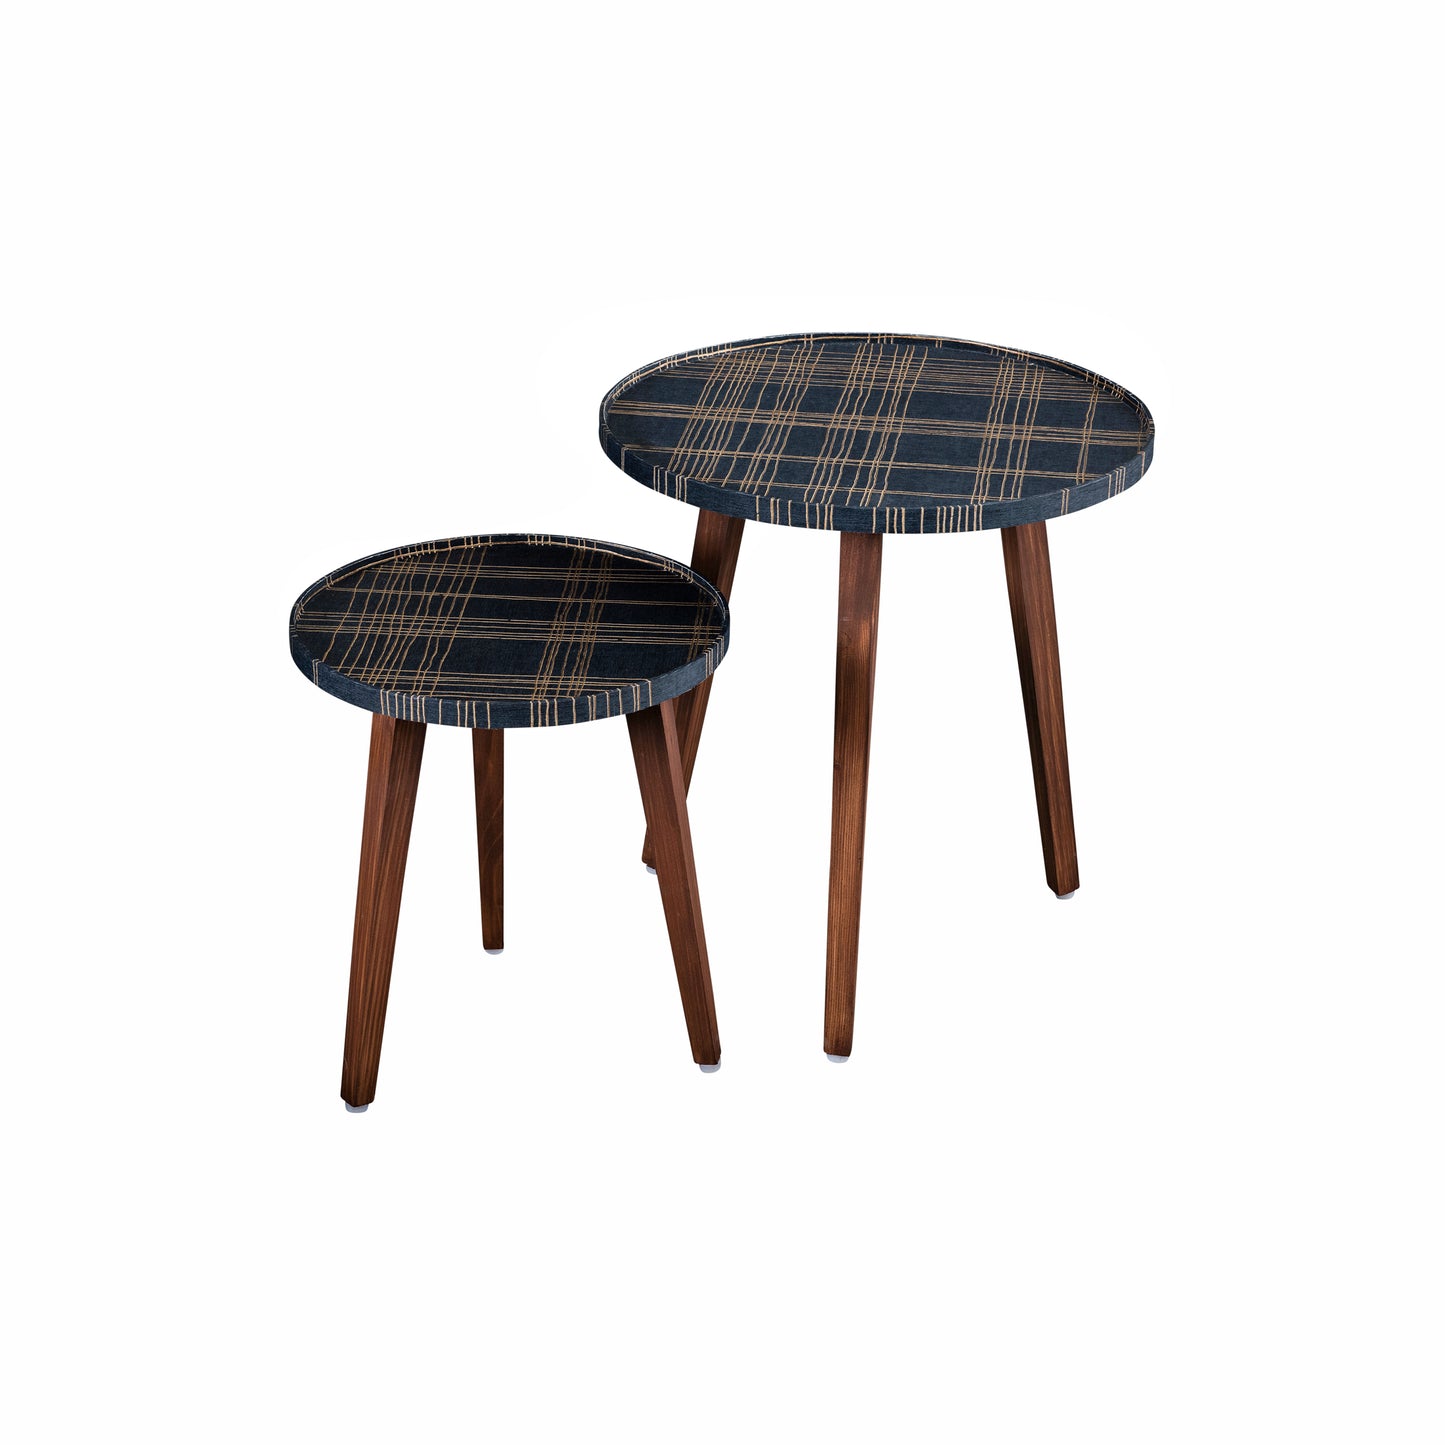 A Tiny Mistake Tesseract Wooden Nesting Tables (Set of 2), Living Room Decor